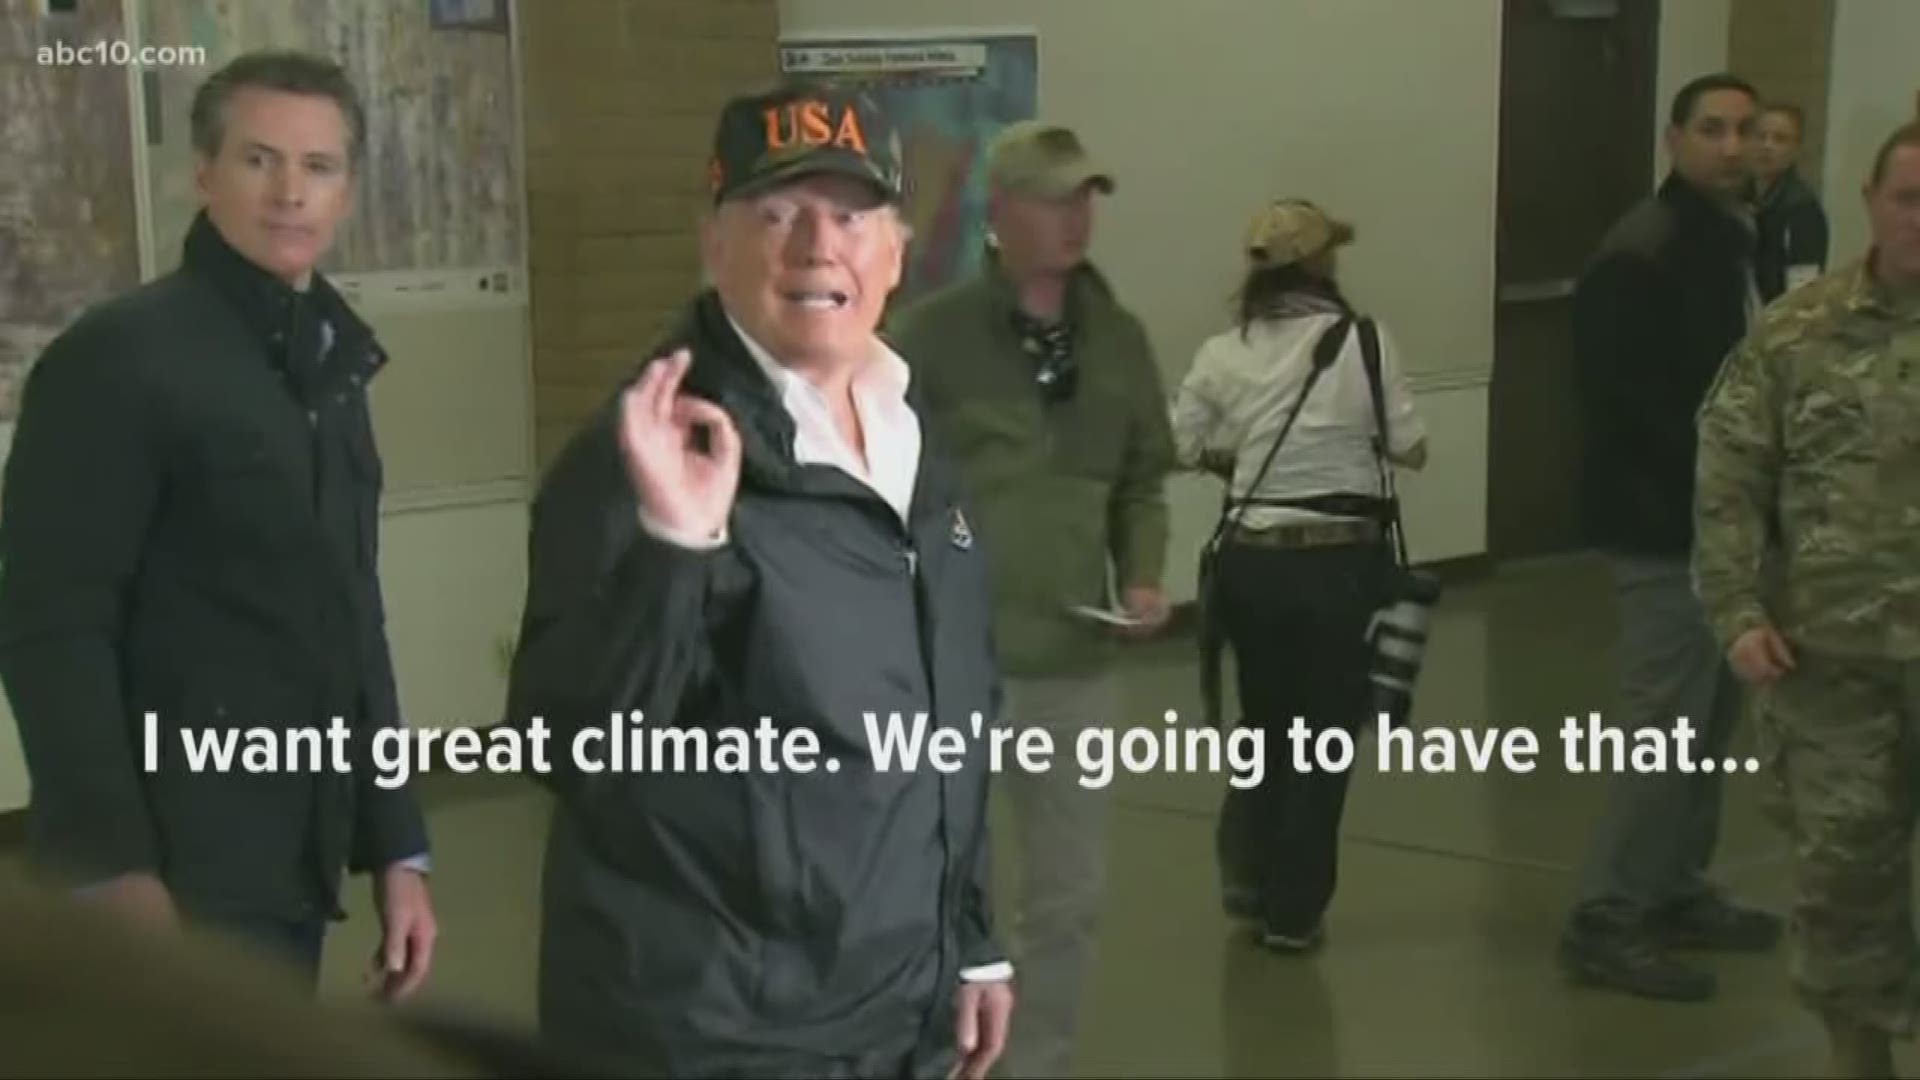 President Trump visited Chico earlier today to speak with those affected by the deadly fires in California.